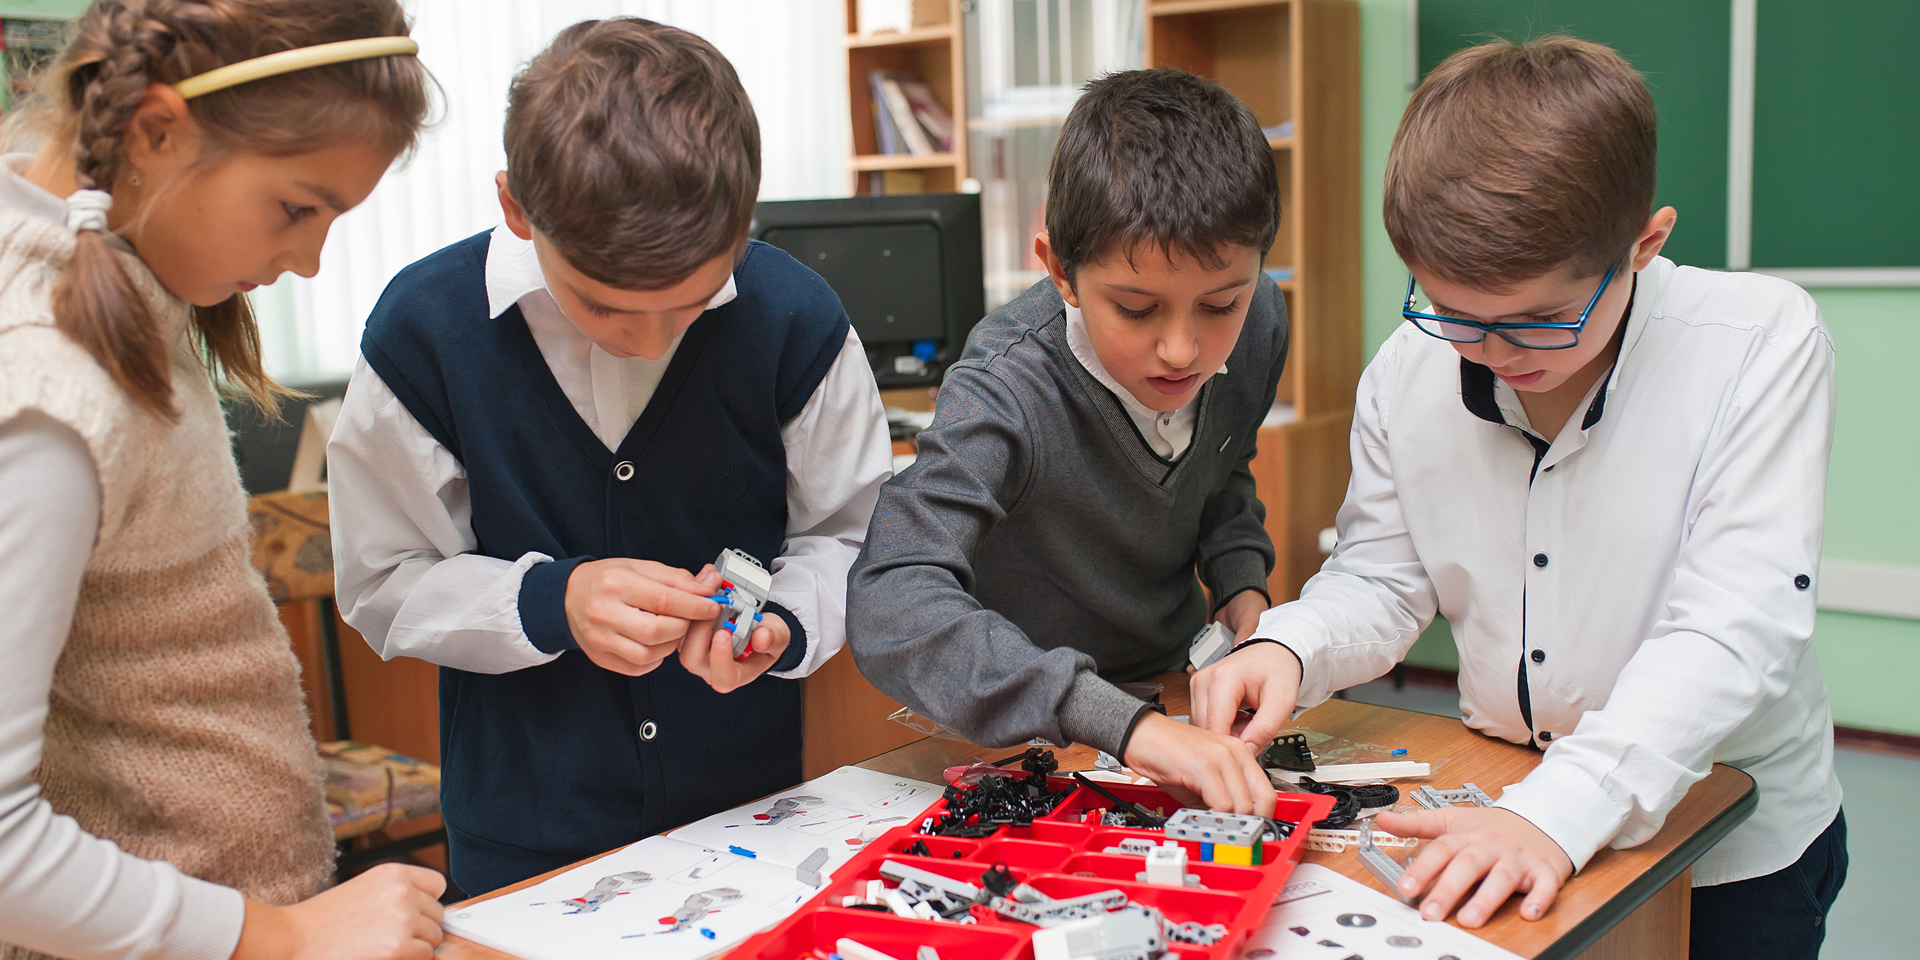 Four children putting together a device using Lego-like parts in a red tray.